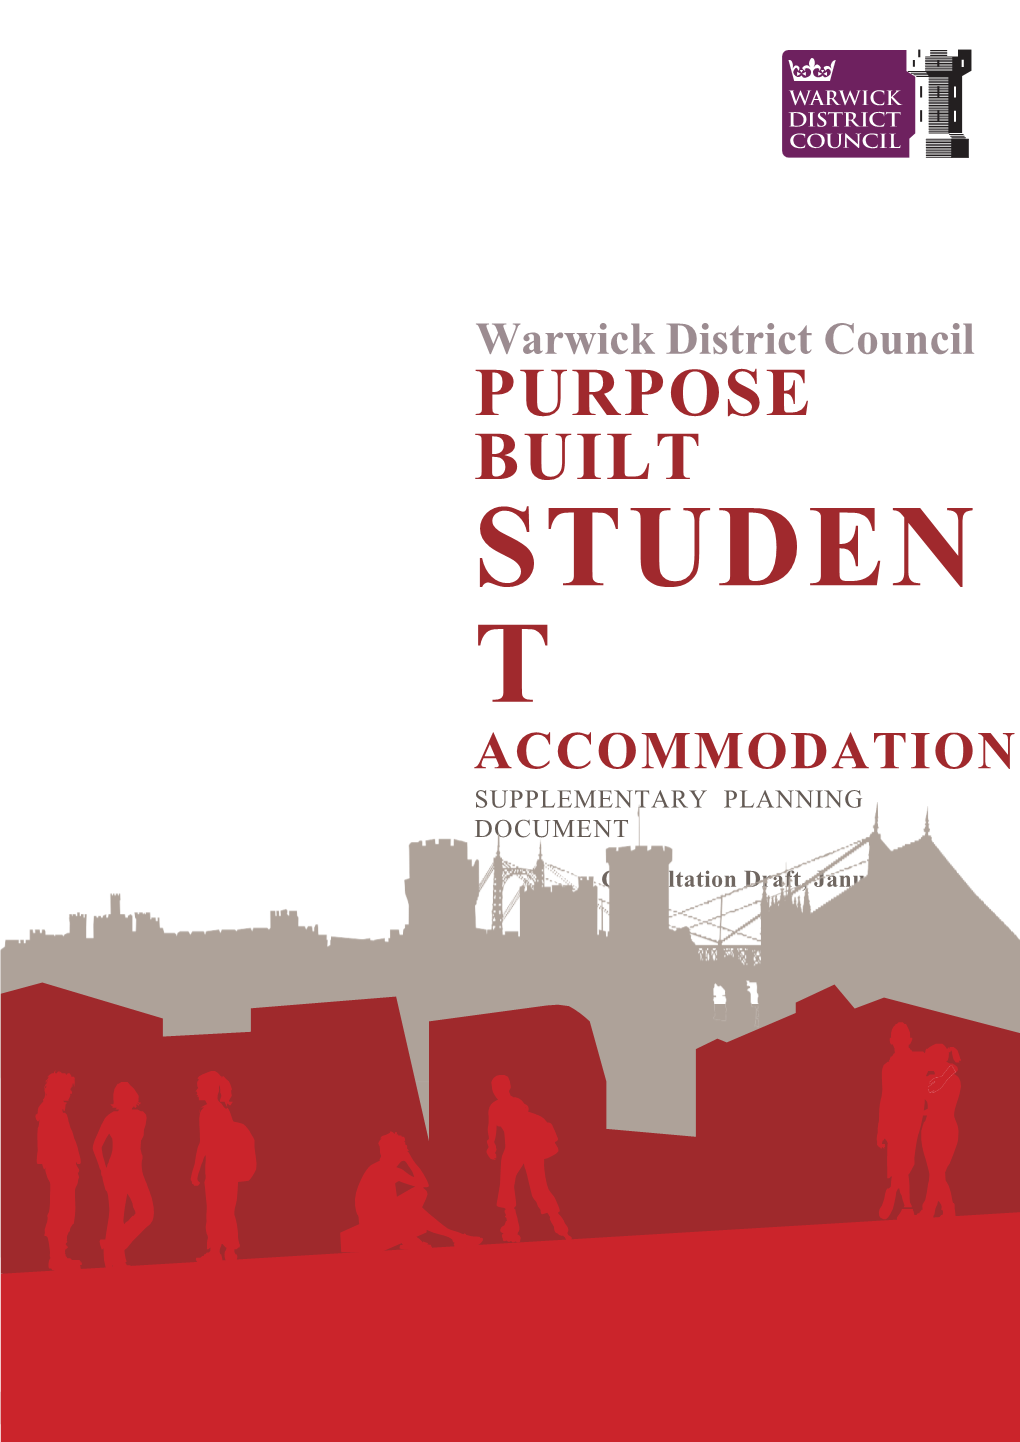 Warwick District Council PURPOSE BUILT STUDEN T ACCOMMODATION SUPPLEMENTARY PLANNING DOCUMENT